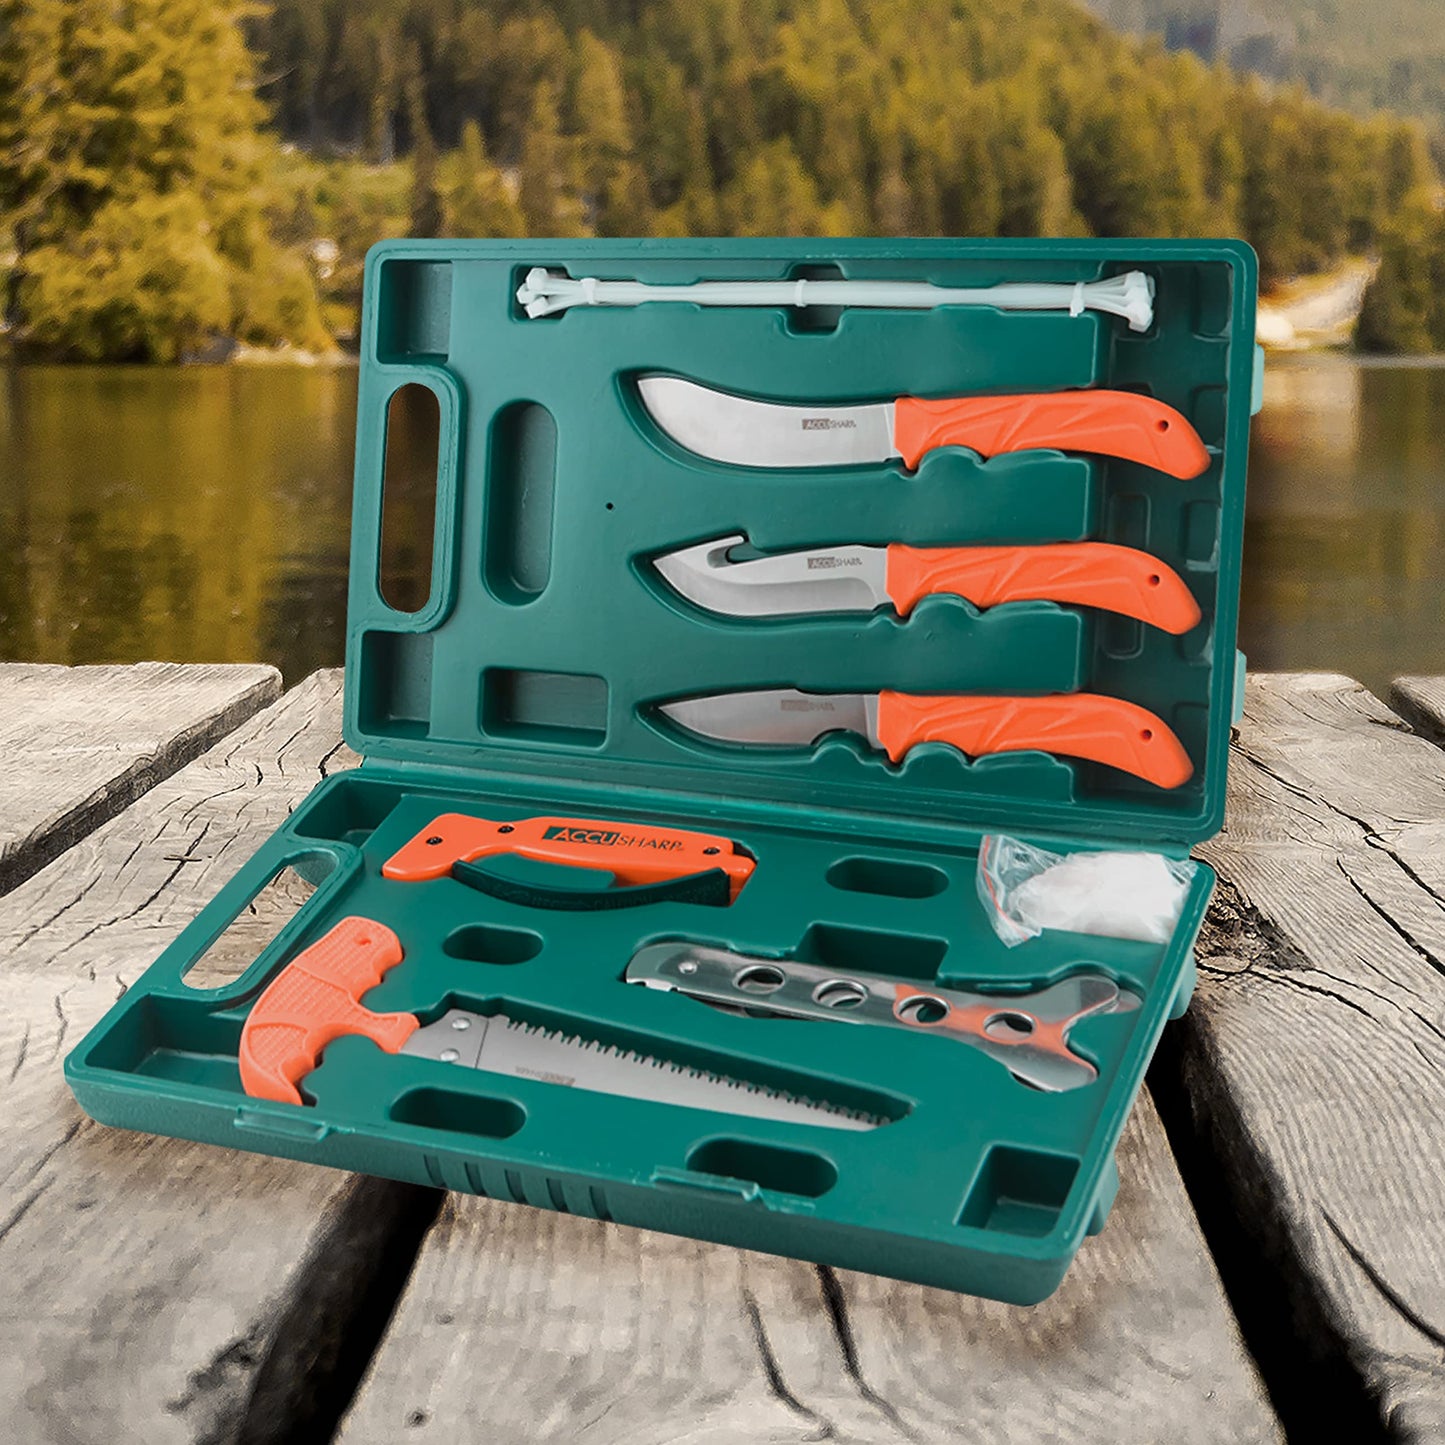 AccuSharp Hunting Kit - 9 Piece Processing Knife Kit with 3 Hunting Knives, Bone Saw, Ribcage Spreader, Zip Ties, Gloves and Knife Sharpener - Complete Field Dressing Kit with Case